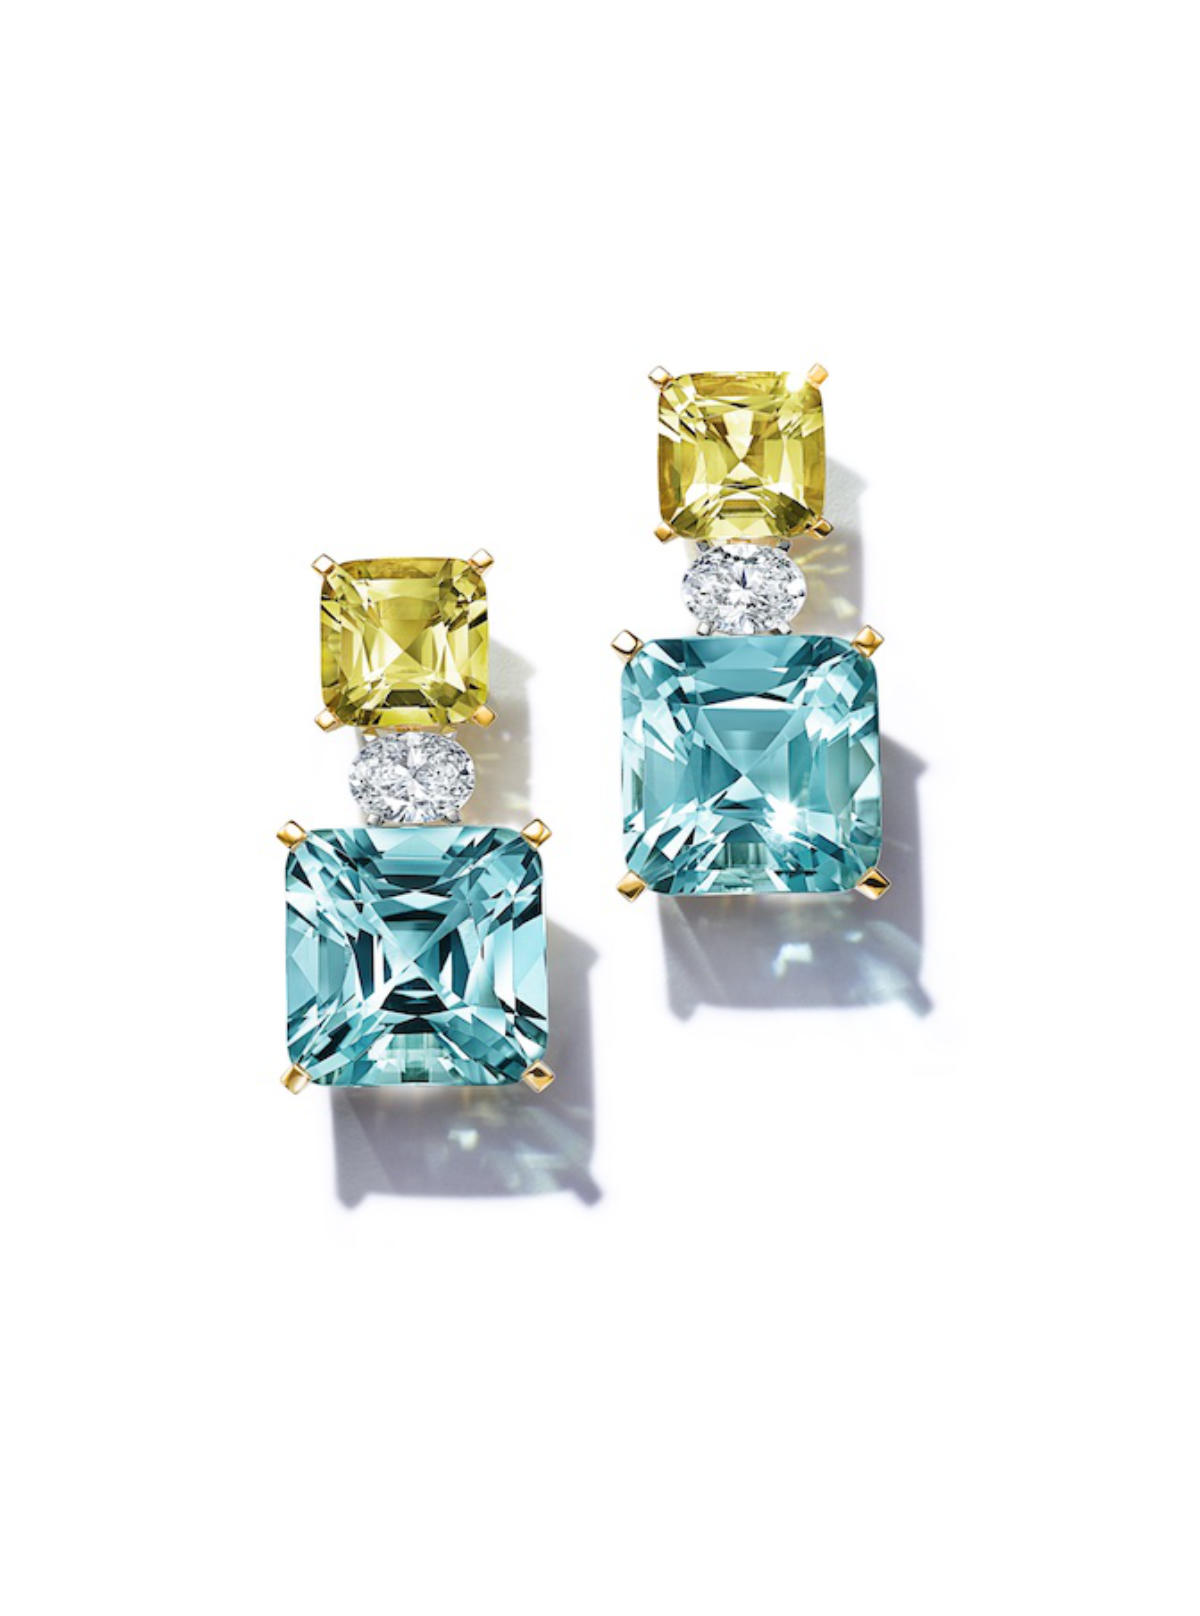 Tiffany & Co.'s Colors Of Nature Collection